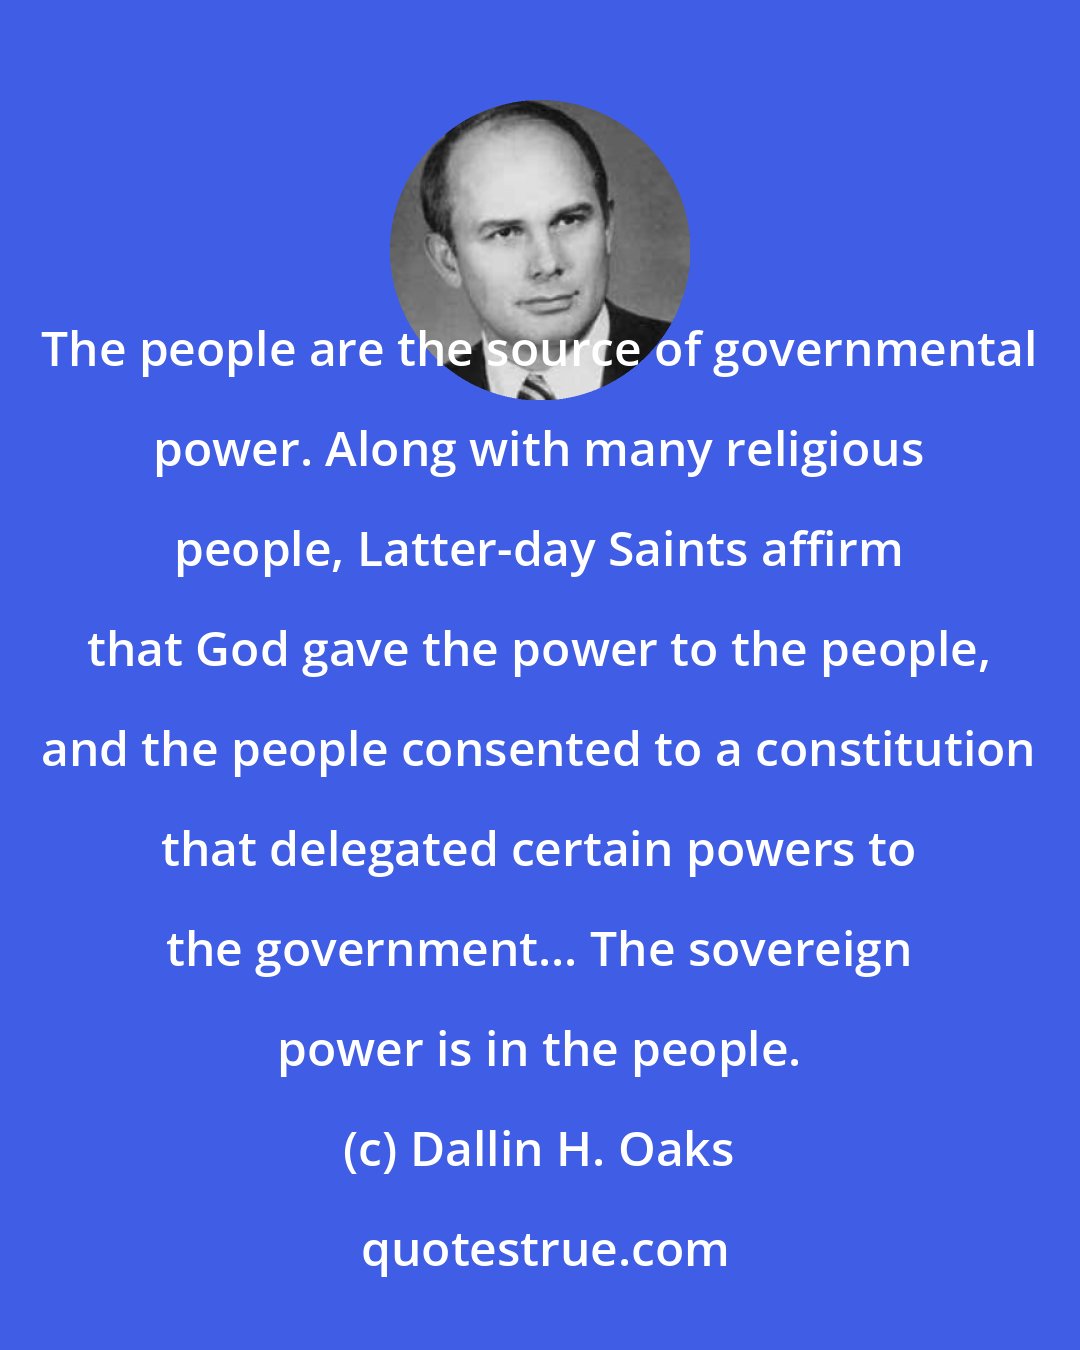 Dallin H. Oaks: The people are the source of governmental power. Along with many religious people, Latter-day Saints affirm that God gave the power to the people, and the people consented to a constitution that delegated certain powers to the government... The sovereign power is in the people.